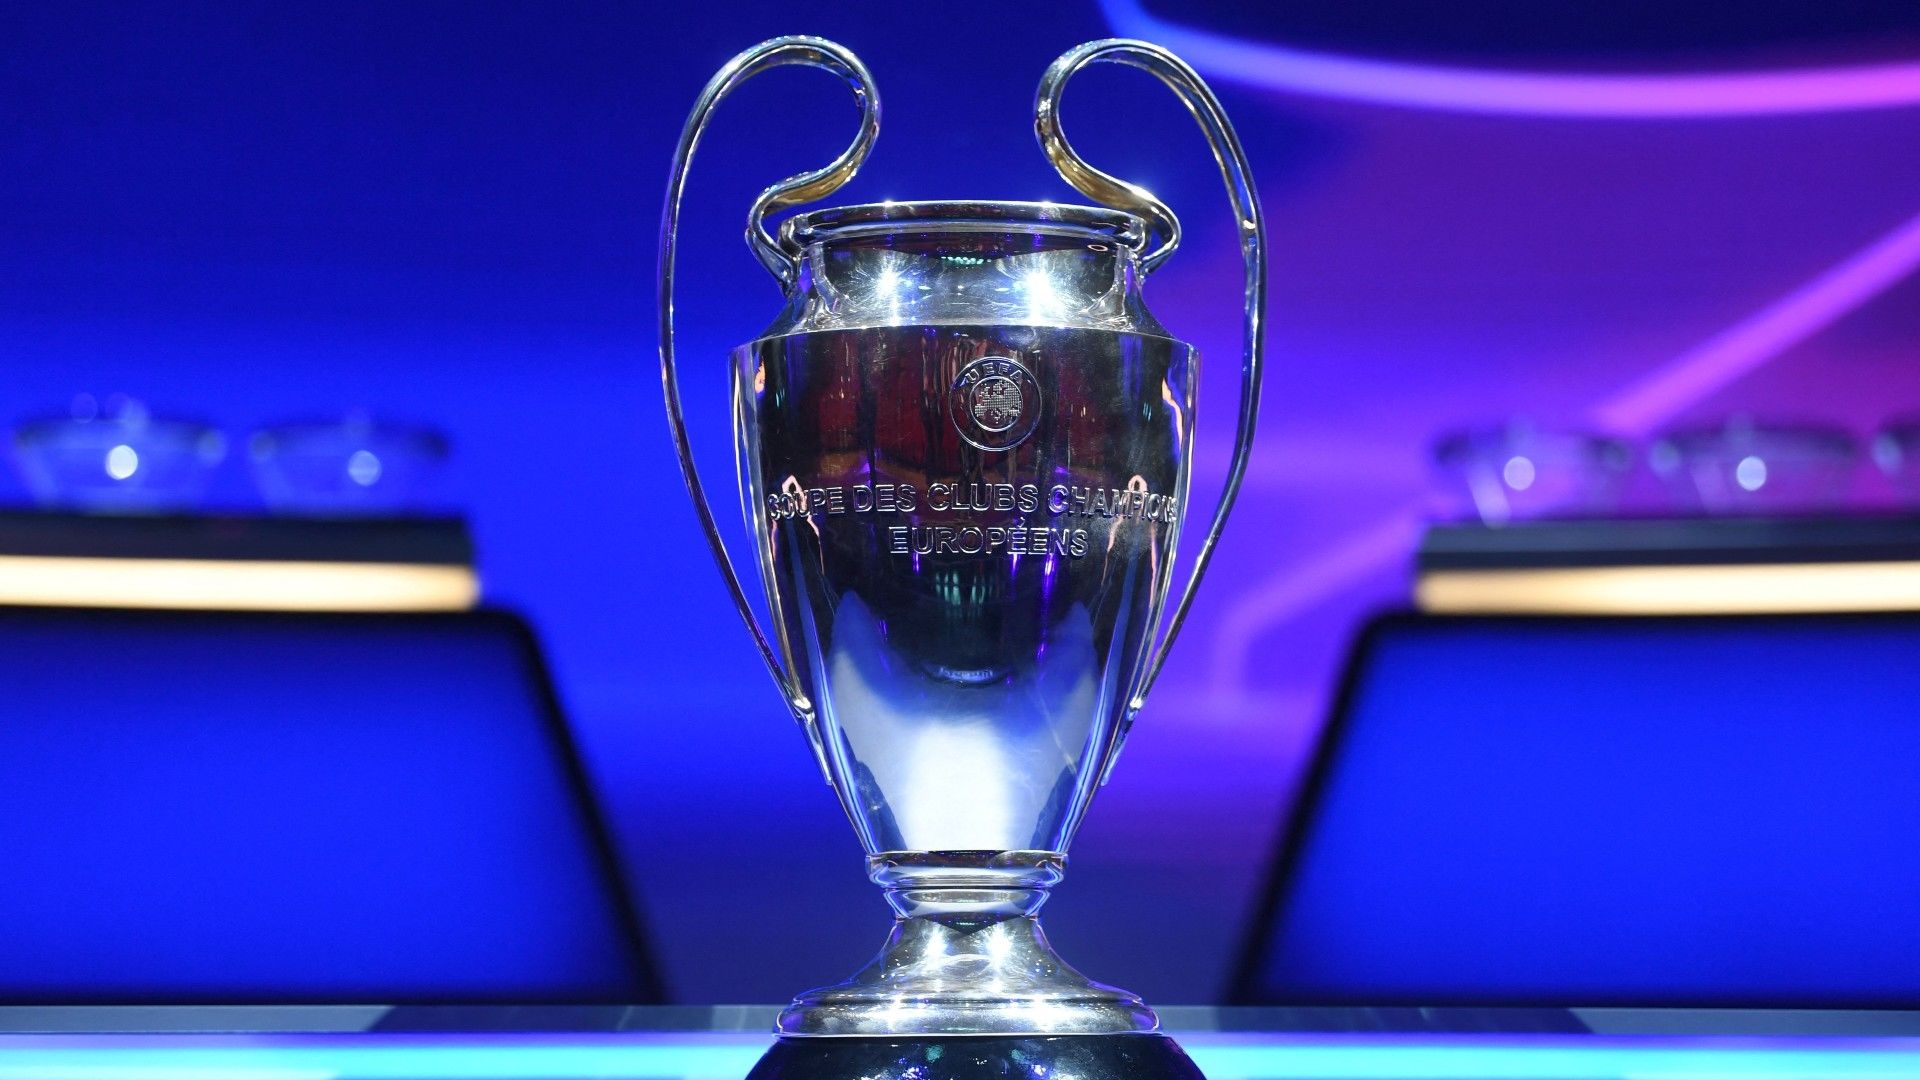 2022/23 Champions League last 16 draw: Date, Time and Qualified Teams |  Intel Region